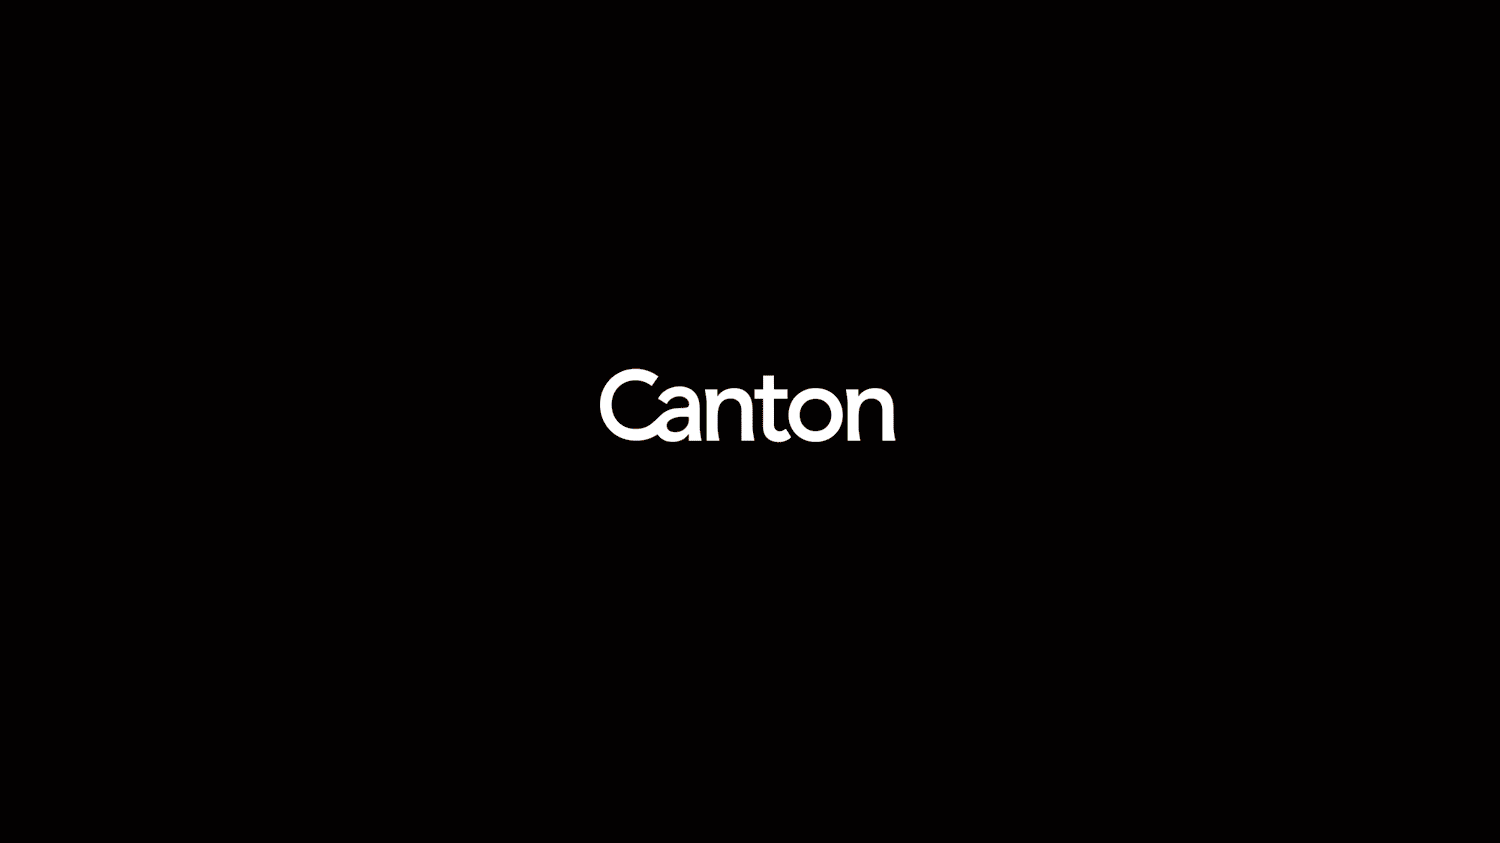 Canton by LG2